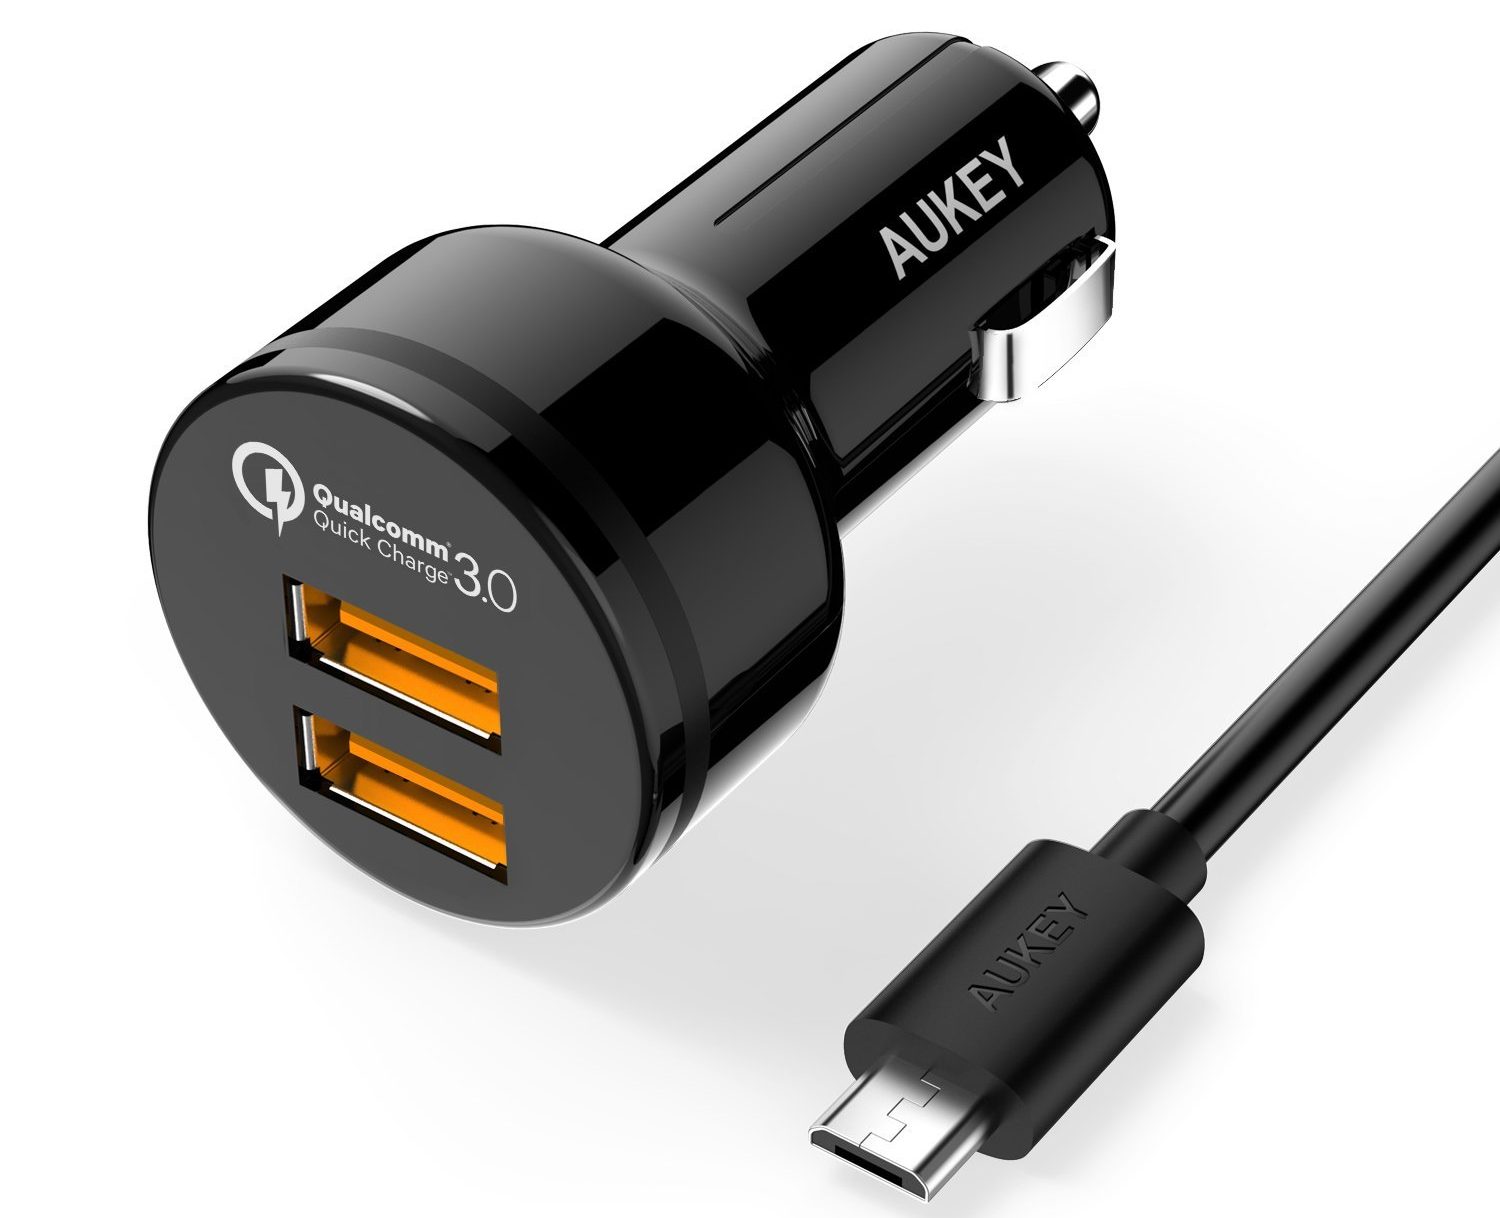 Aukey Quick Charge 3.0